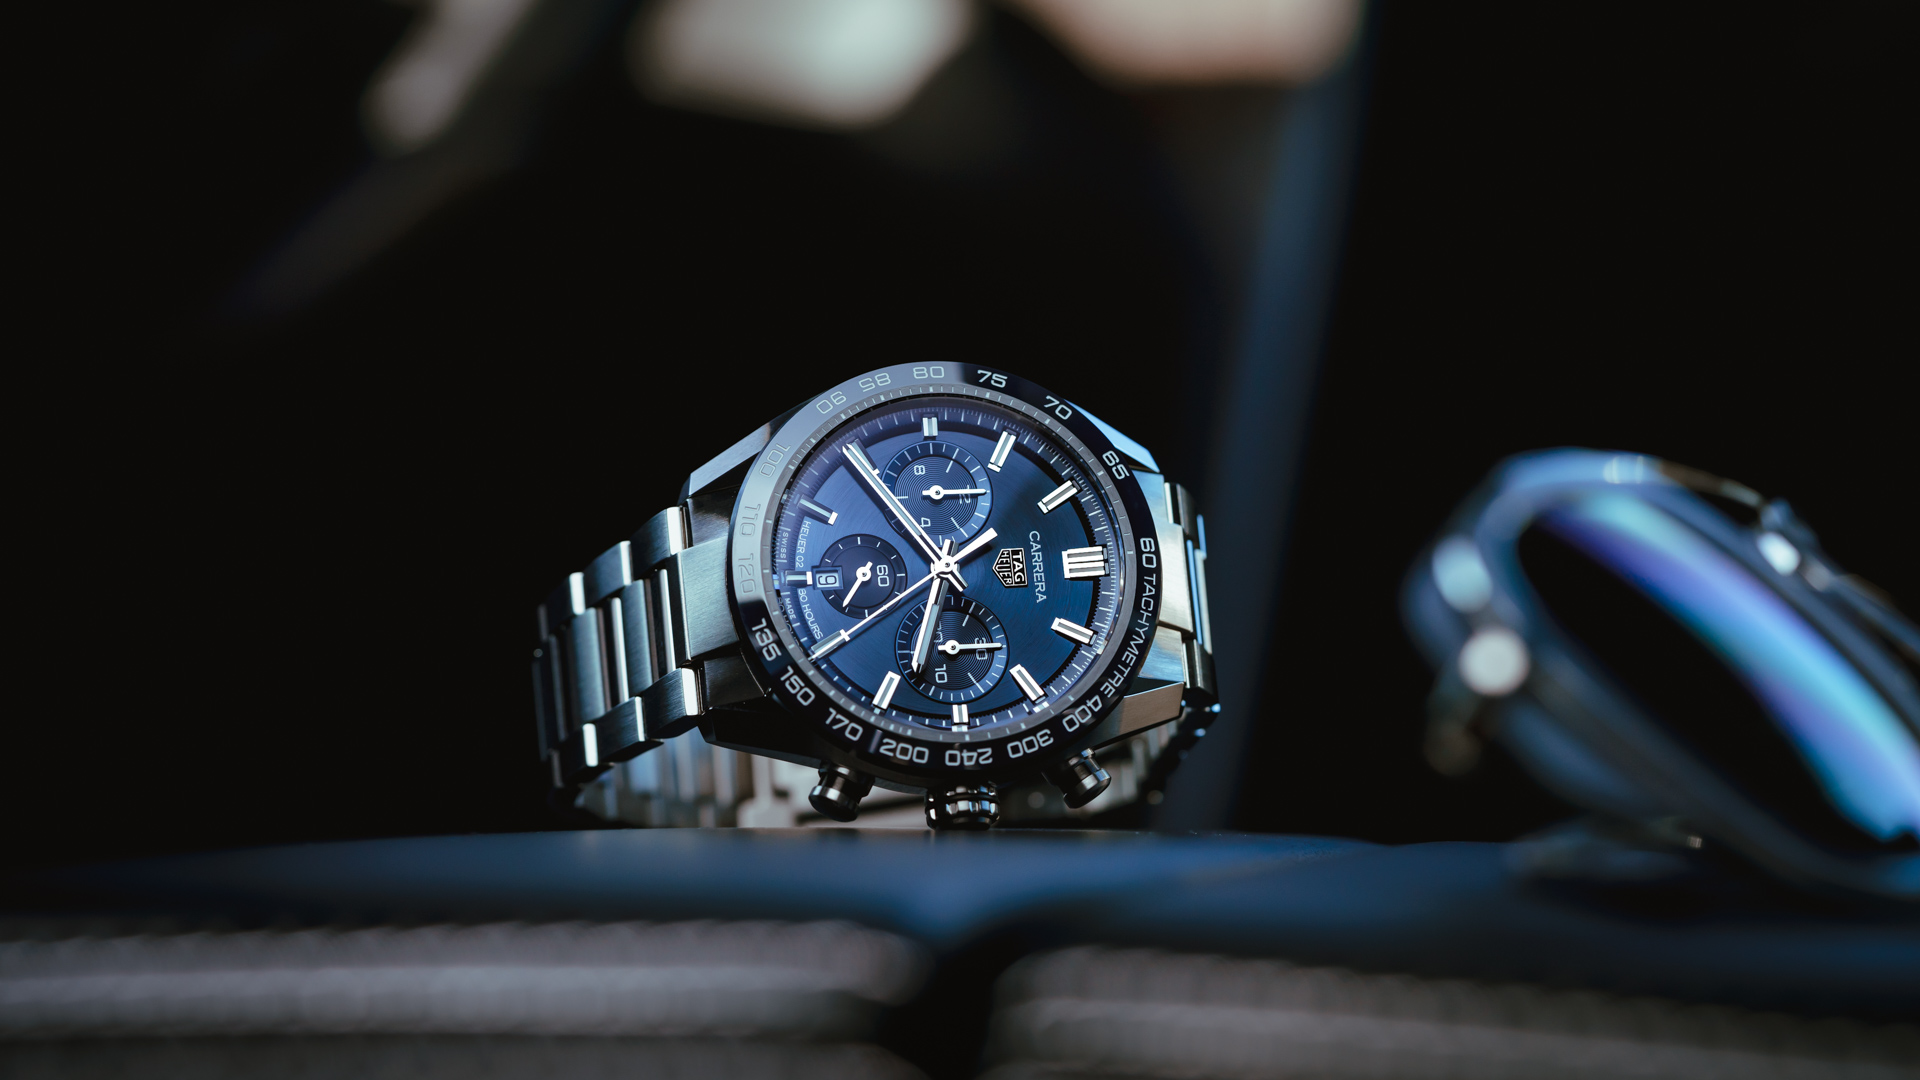 2020 TAG Heuer Carrera Chronograph - The Hour Glass Official